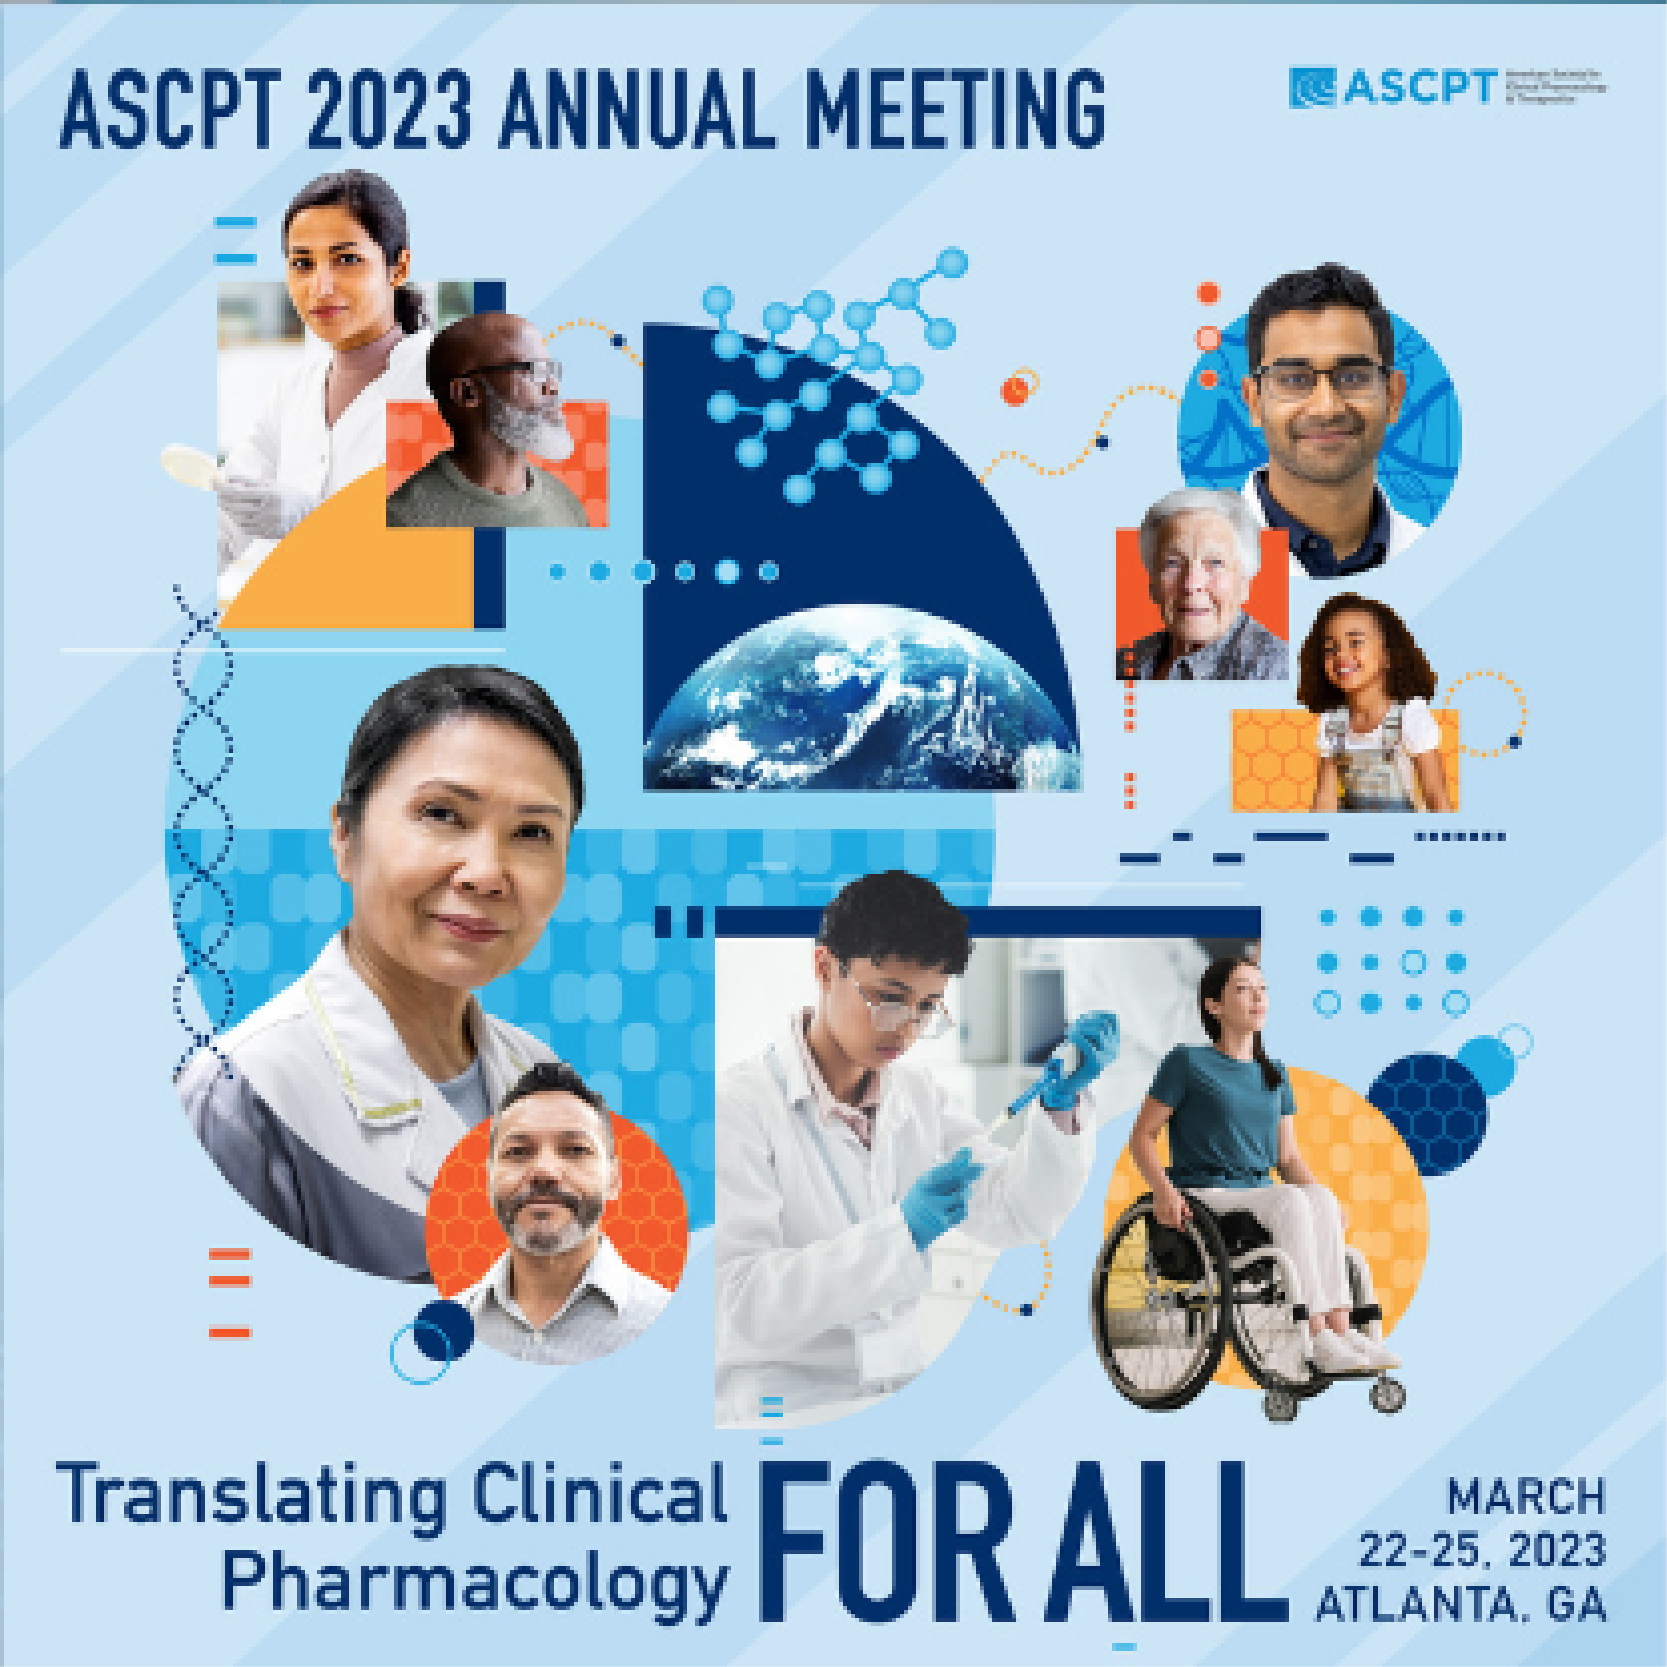 American Society for Clinical Pharmacology and Therapeutics - 2023